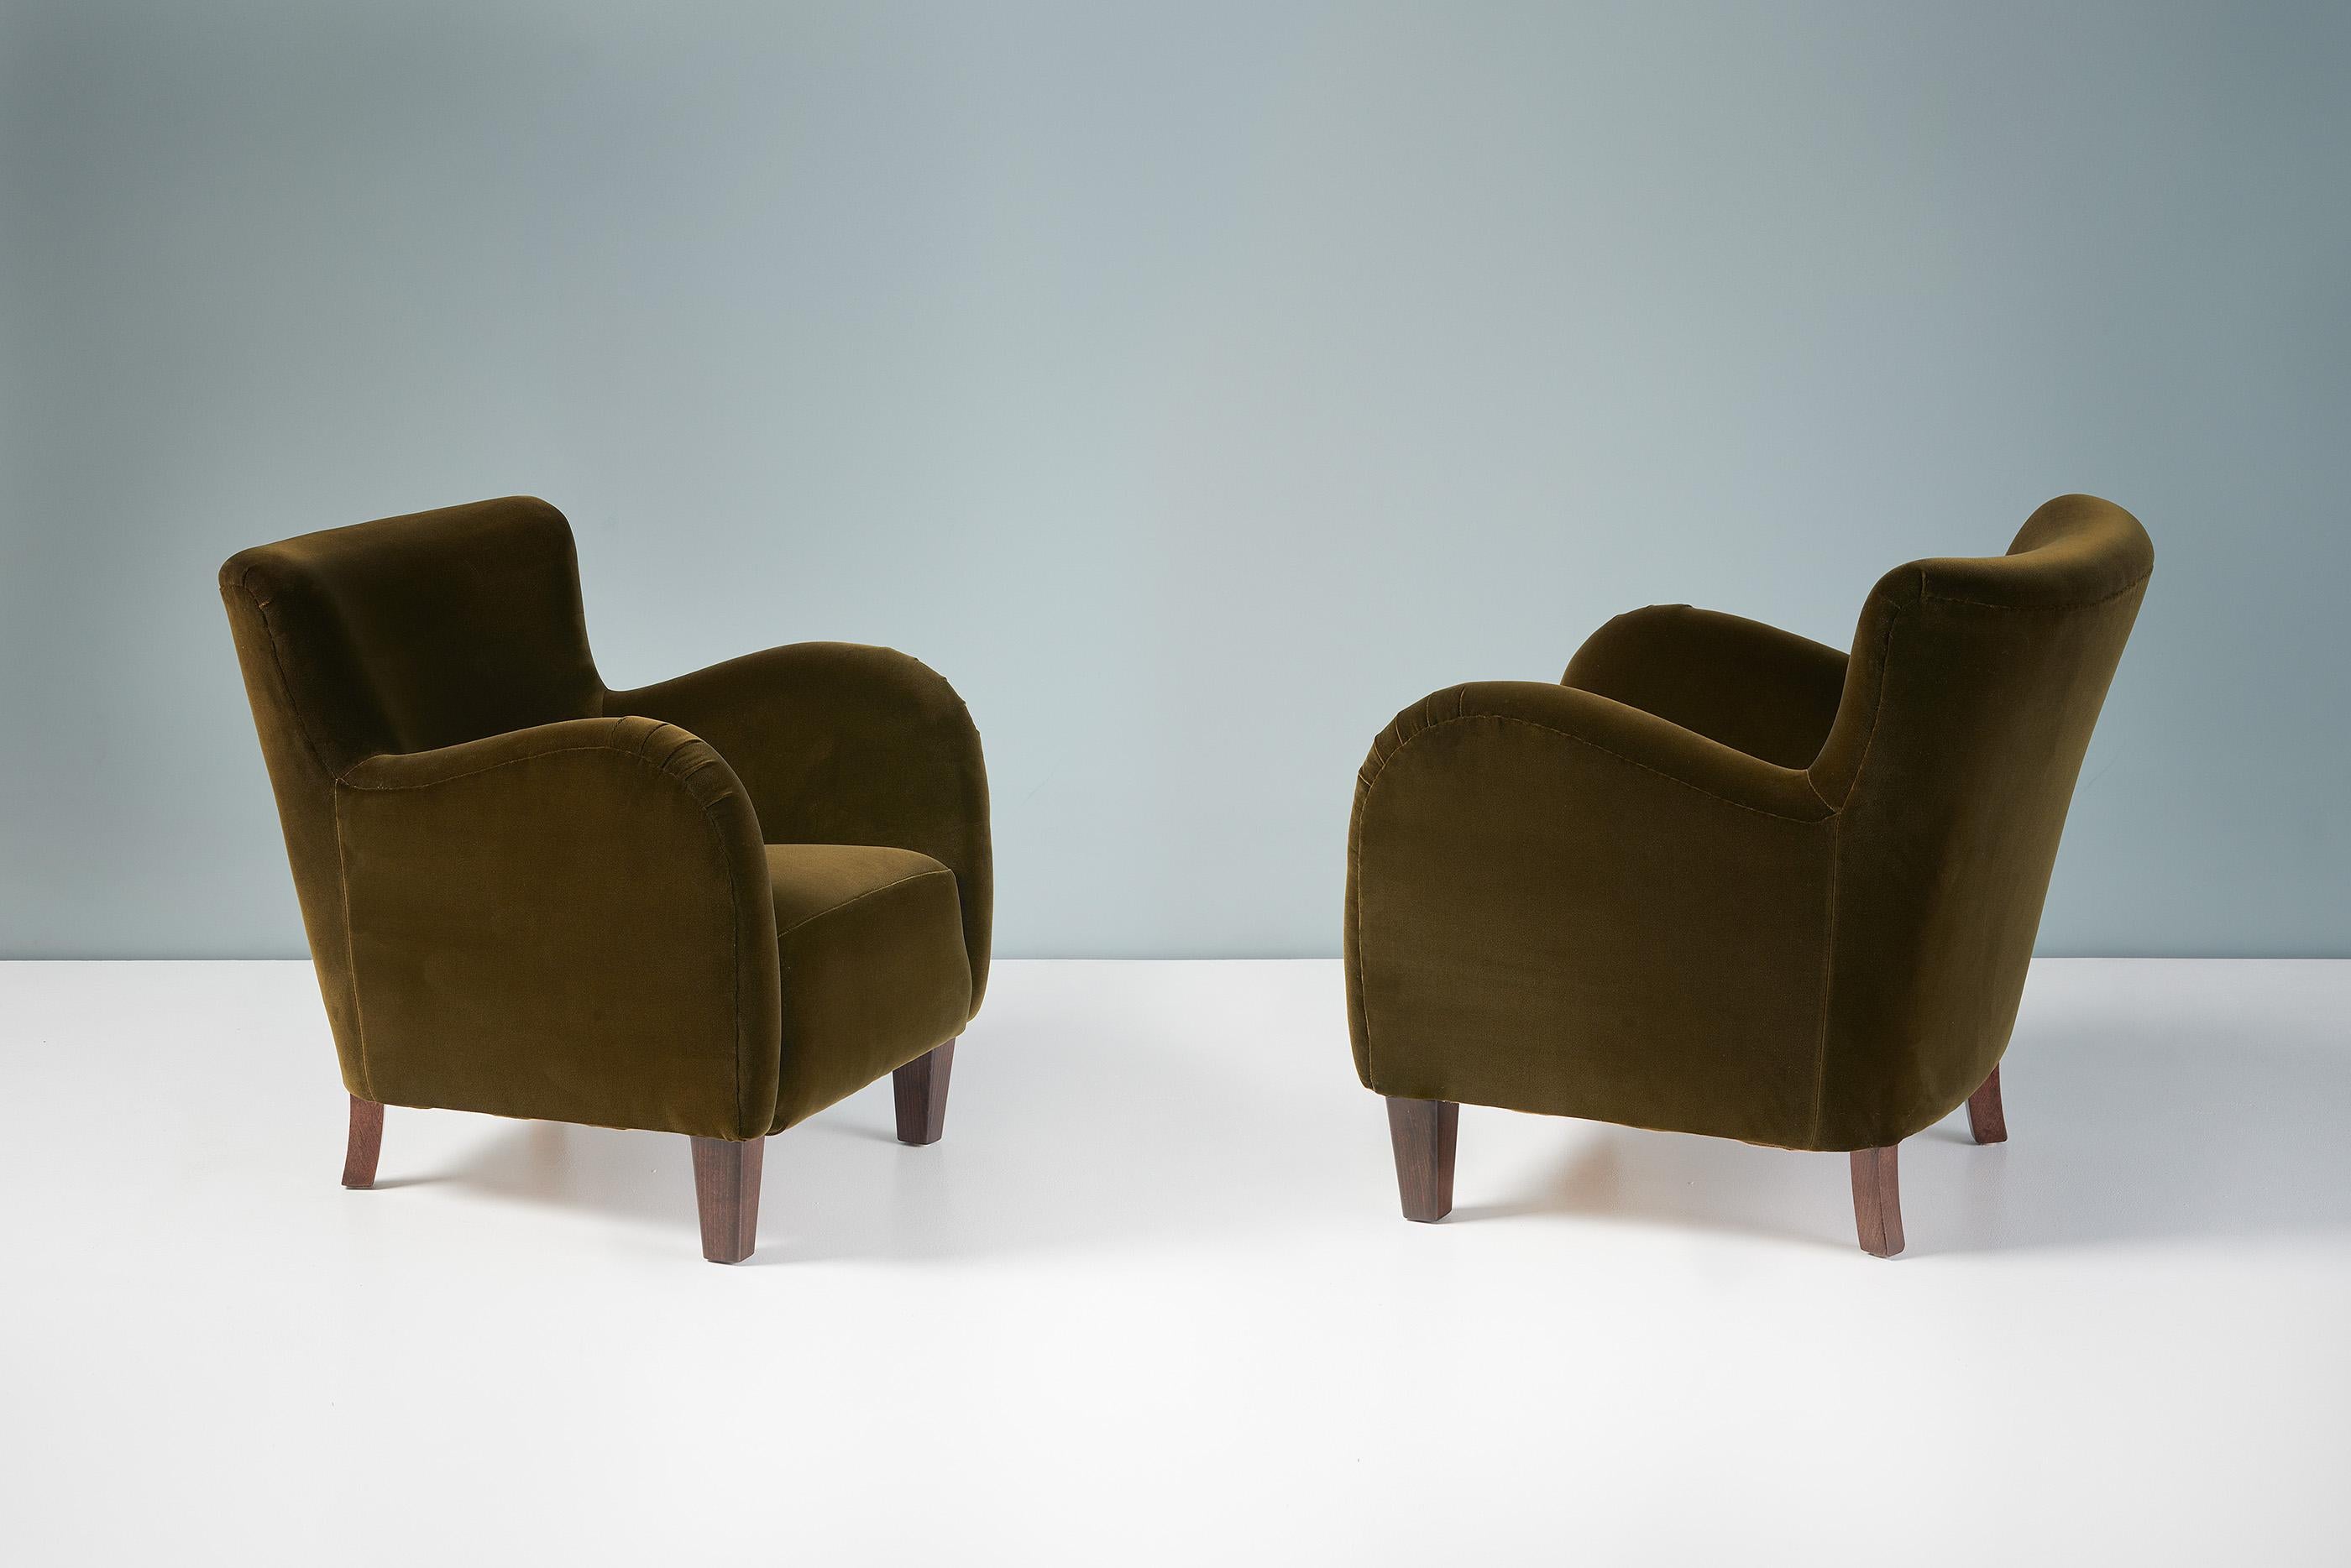 A pair of 1940s lounge chairs produced by a Danish cabinetmaker in the 1940s. These examples have been reupholstered in moss green velvet fabric from Rose Uniacke. The legs are stained beech wood.

Each chair has been fully reconditioned in our